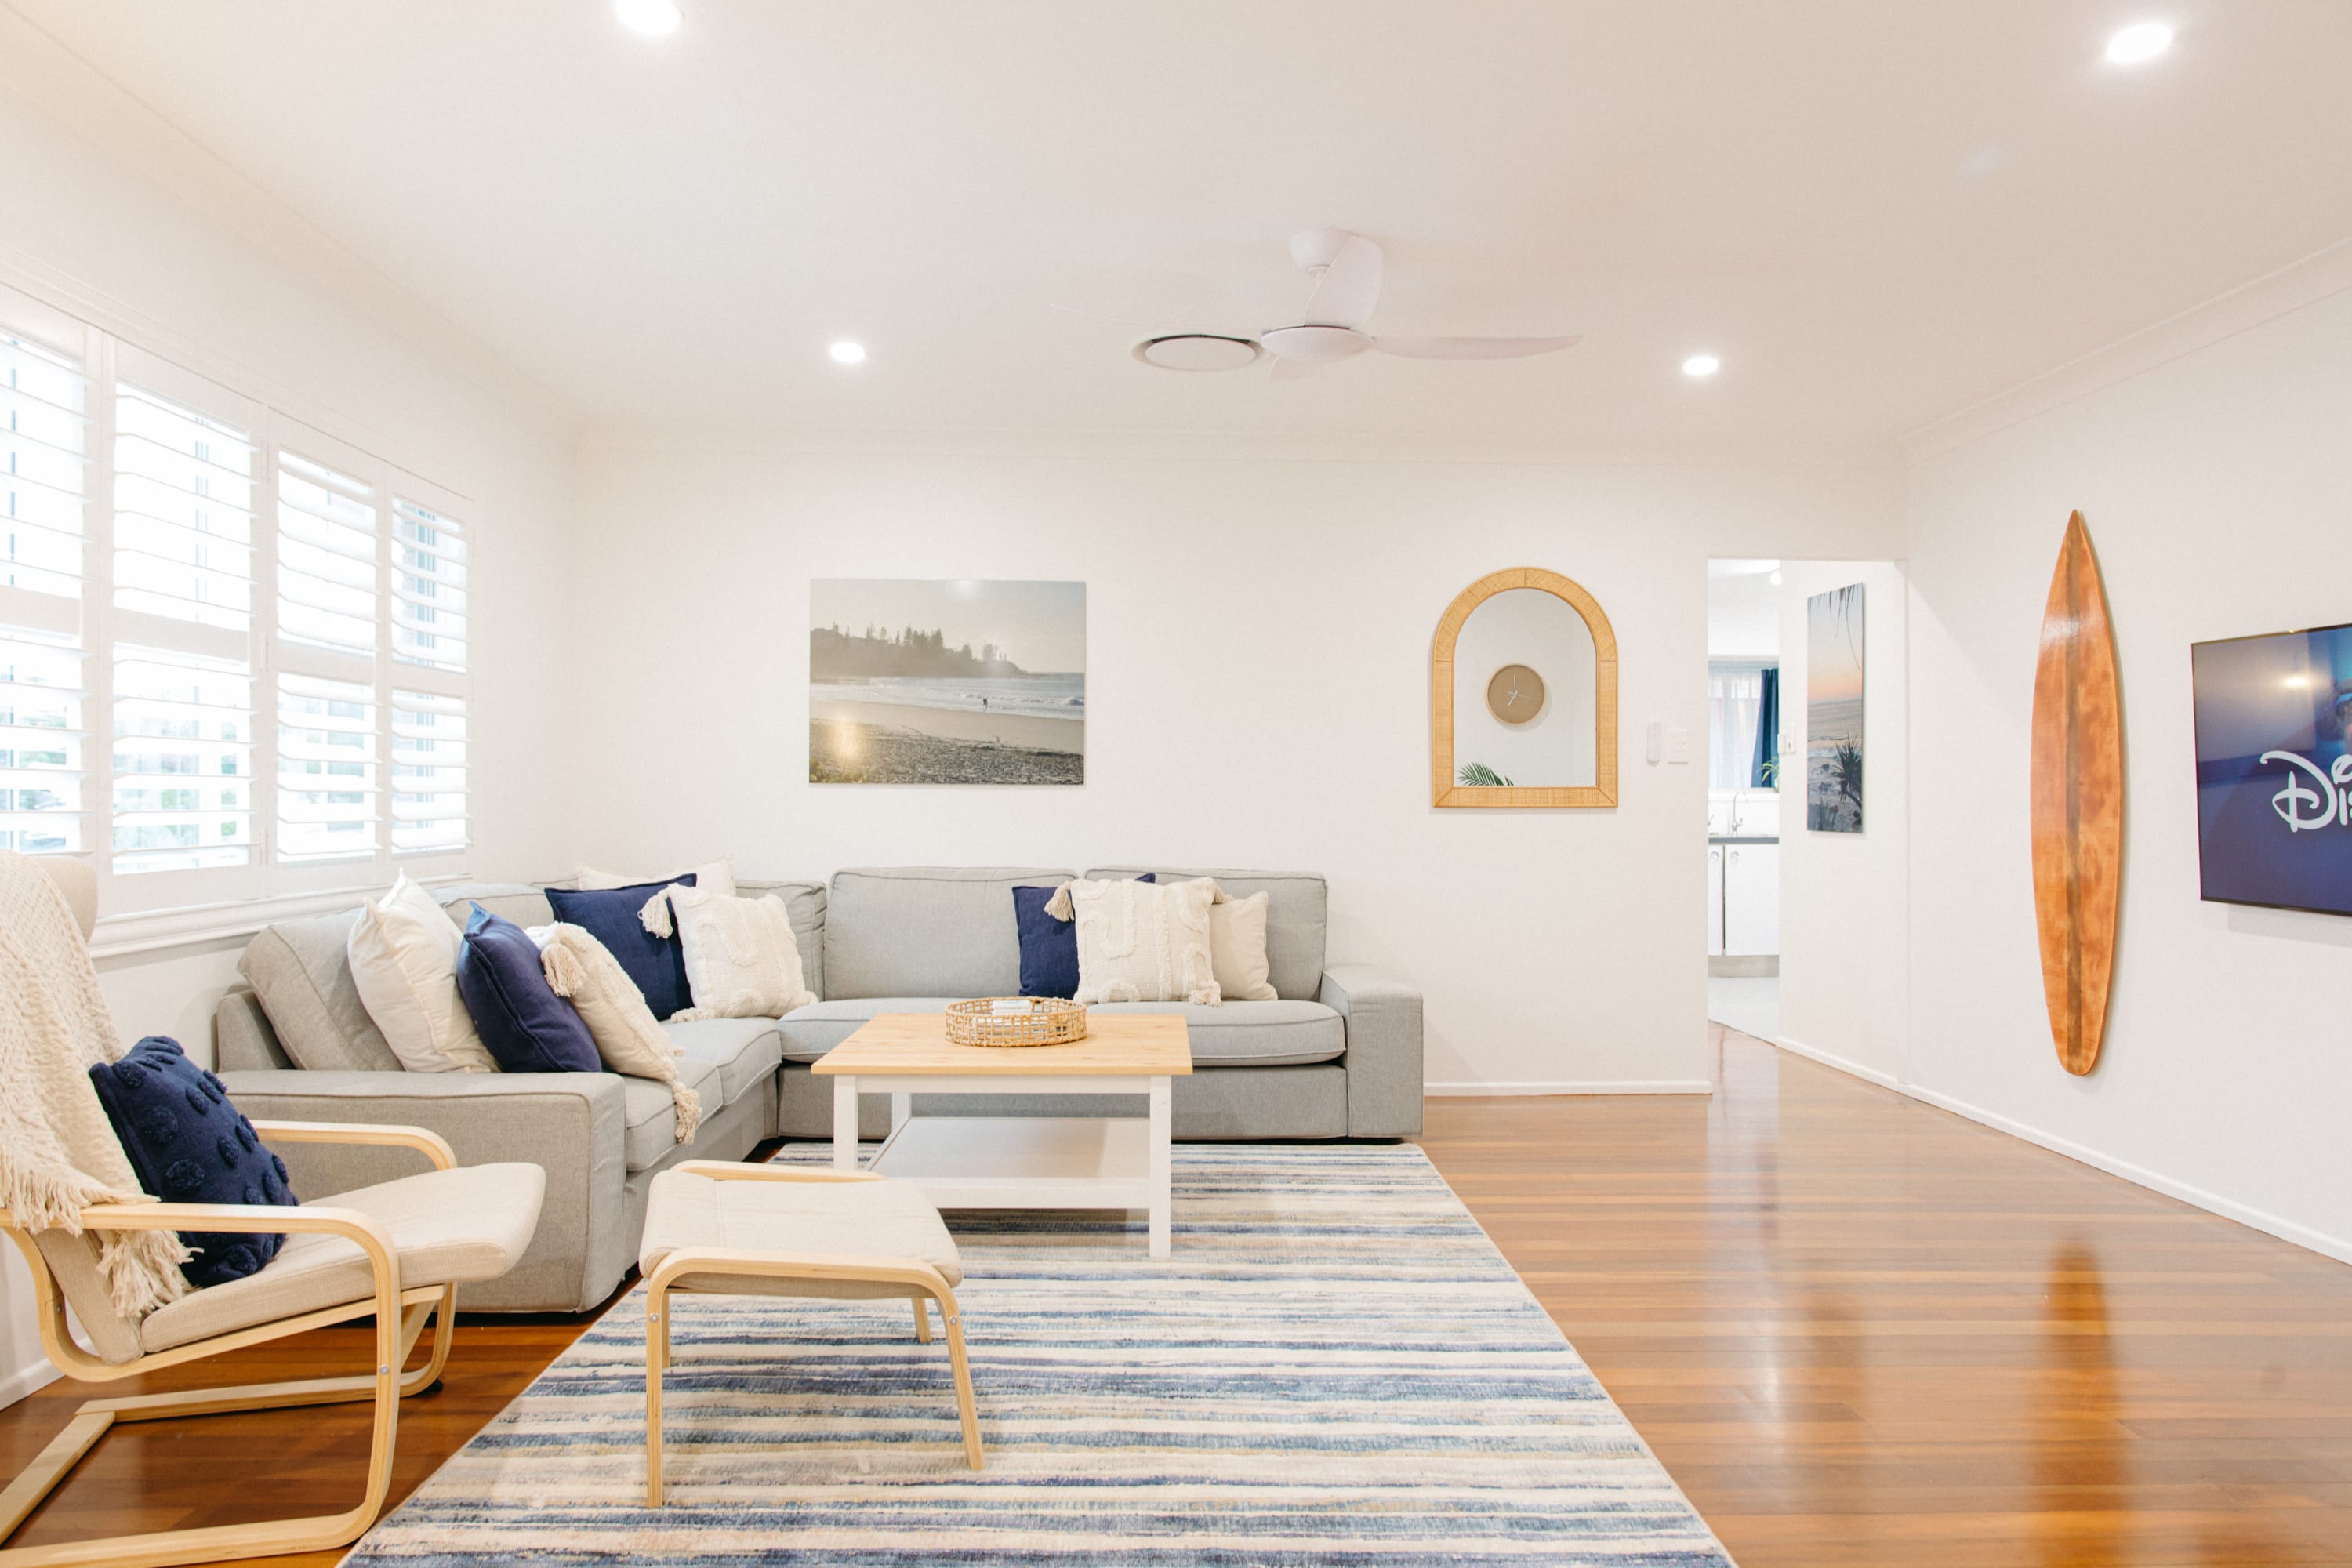 The spacious living room is perfect to relax and unwind